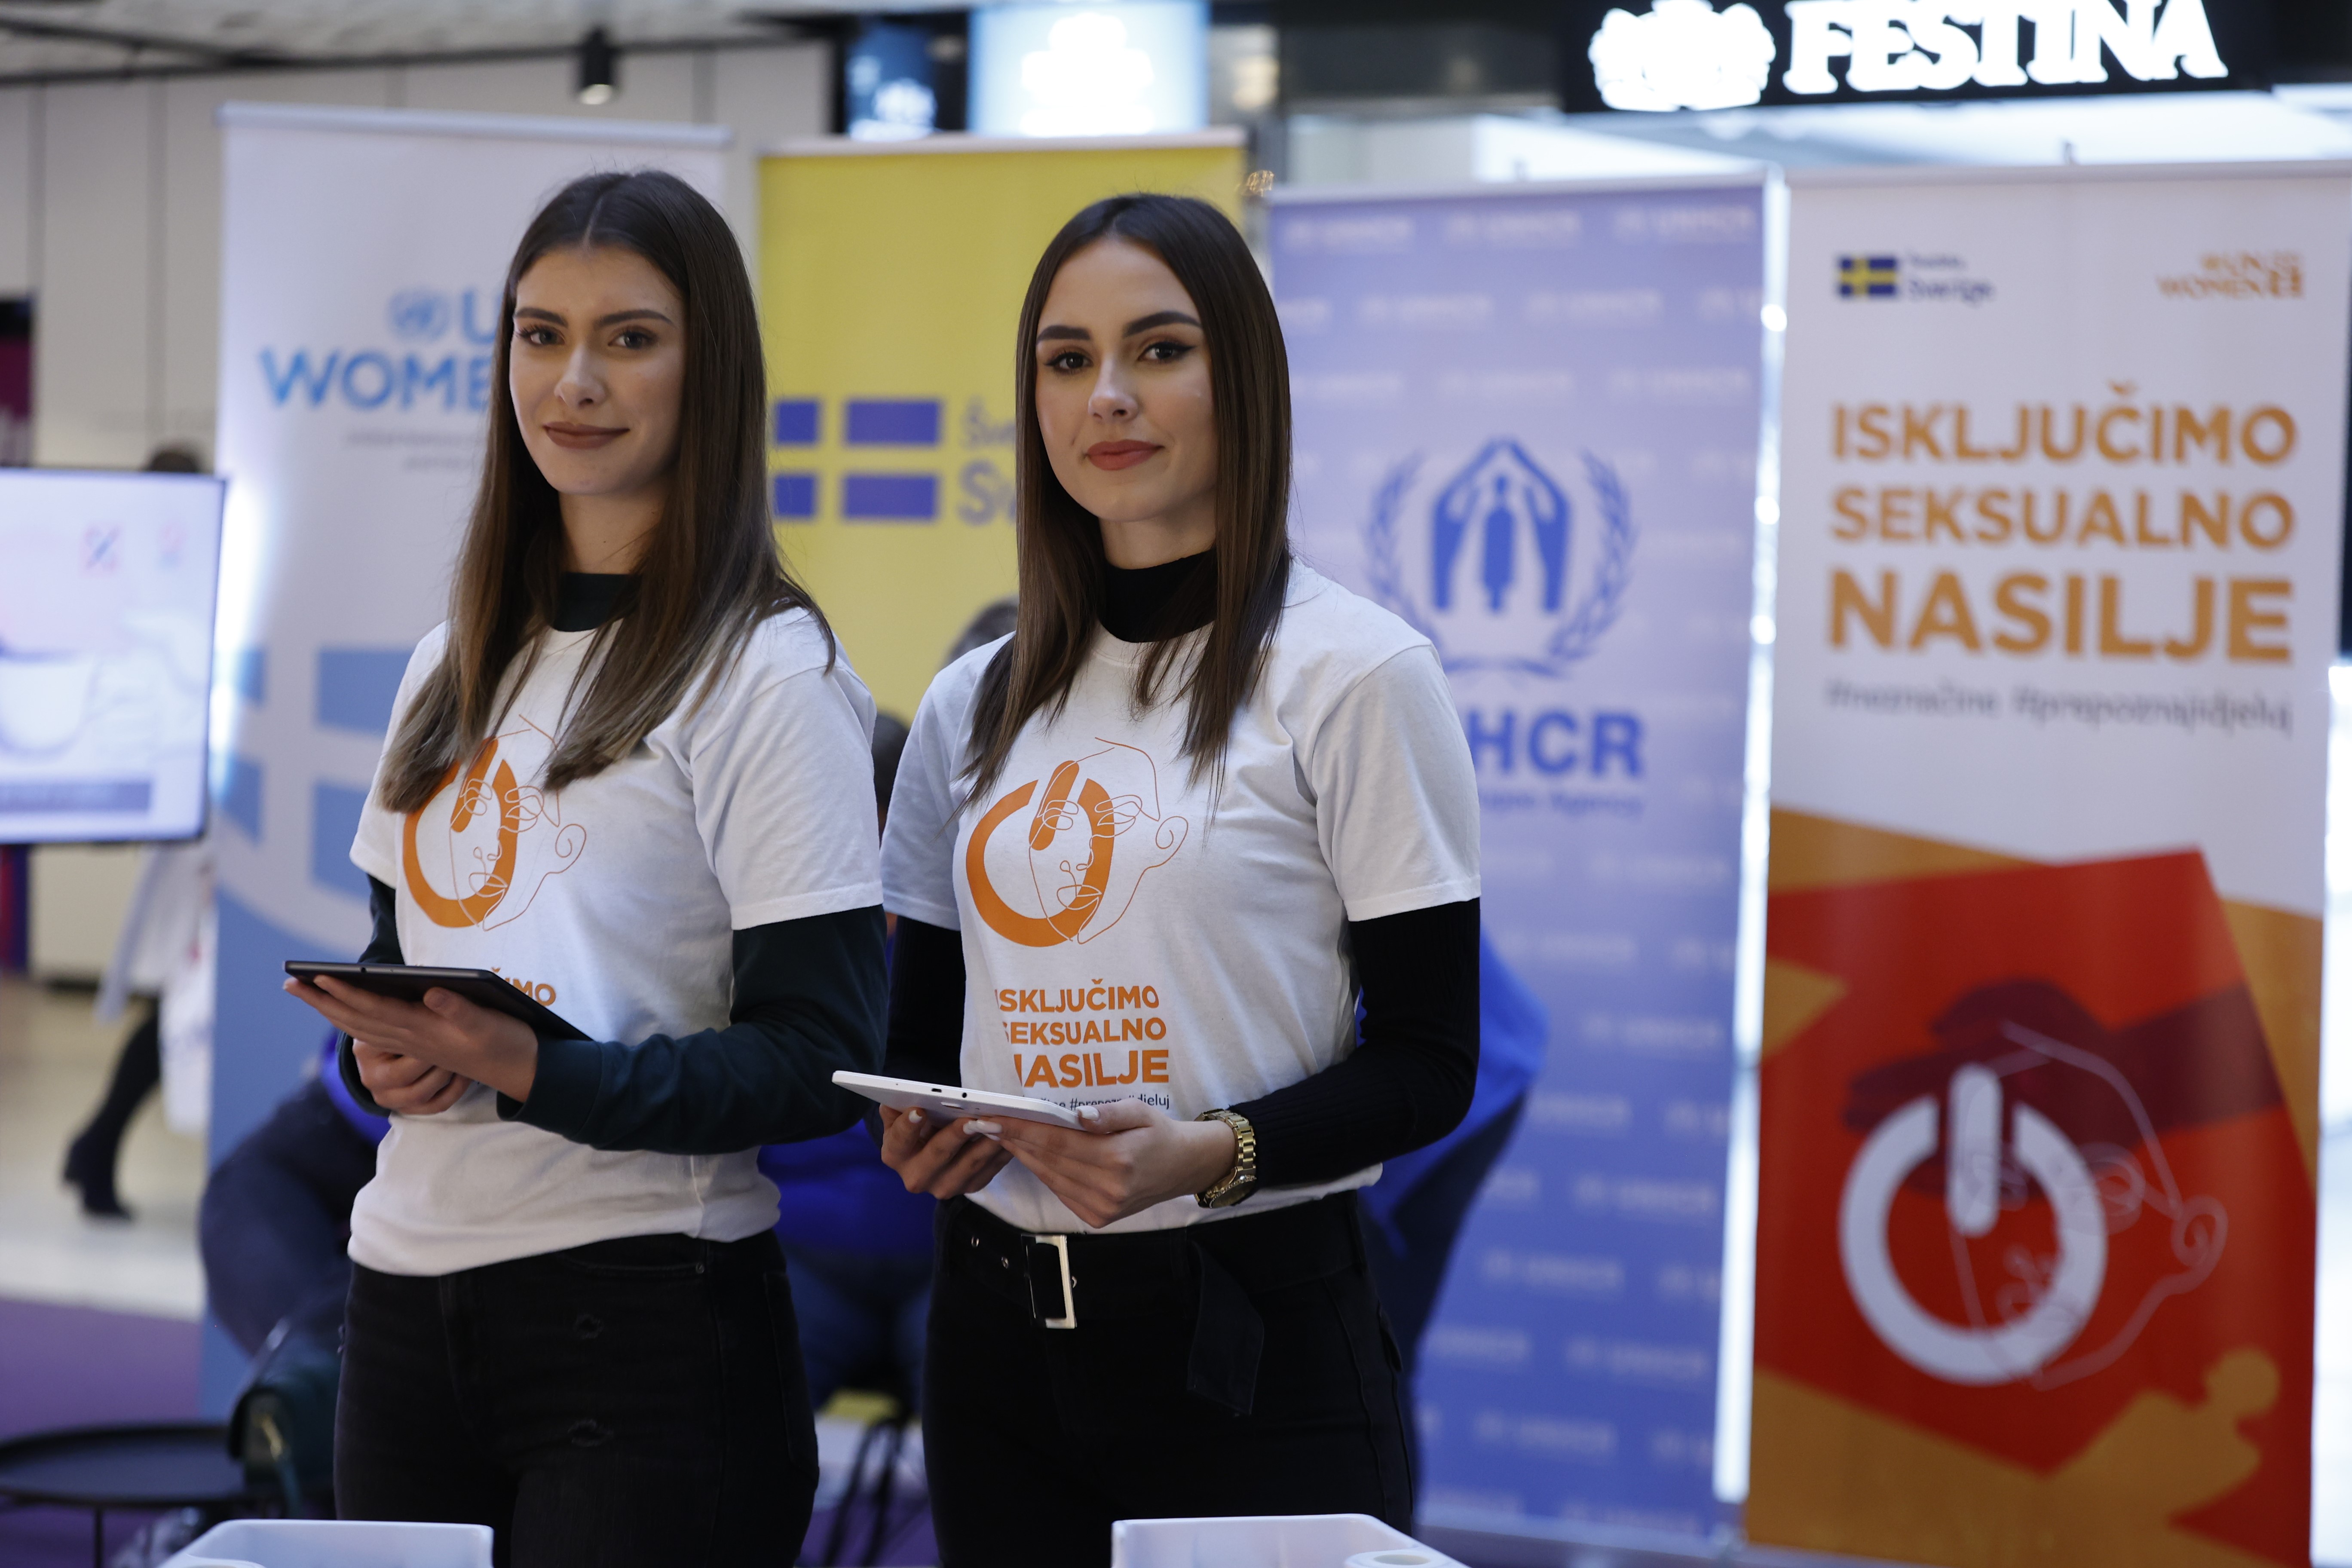 Info corner on sexual violence in SCC shopping mall in Sarajevo, Bosnia and Herzegovina, during 16 Days of Activism. Photo: UN Women/Hazim Aljovic